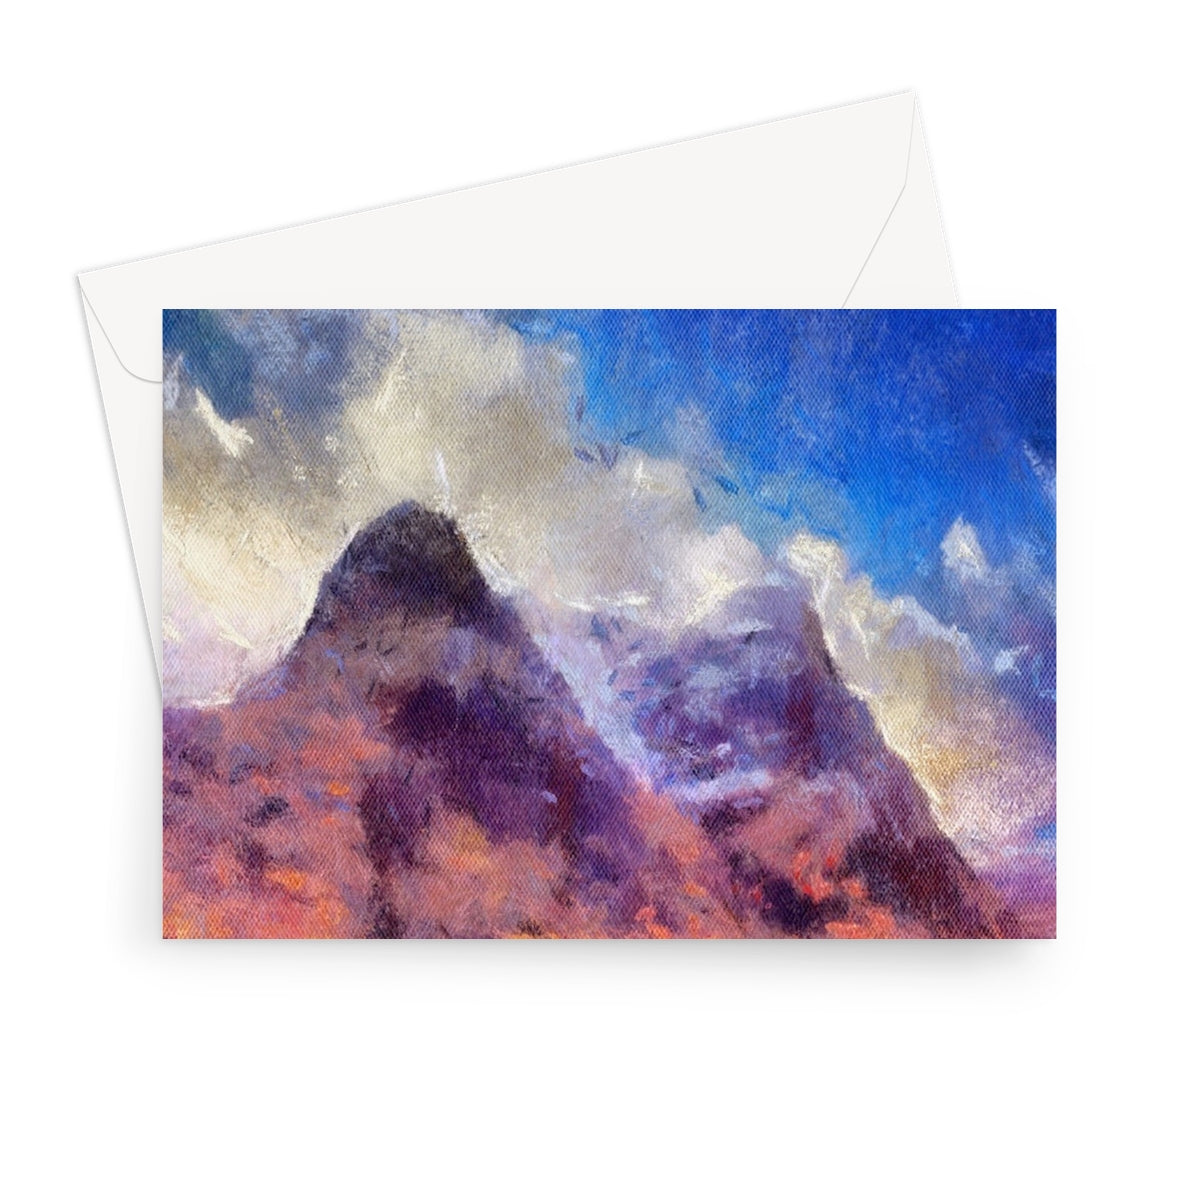 Glencoe Art Gifts Greeting Card-Greetings Cards-Glencoe Art Gallery-7"x5"-1 Card-Paintings, Prints, Homeware, Art Gifts From Scotland By Scottish Artist Kevin Hunter